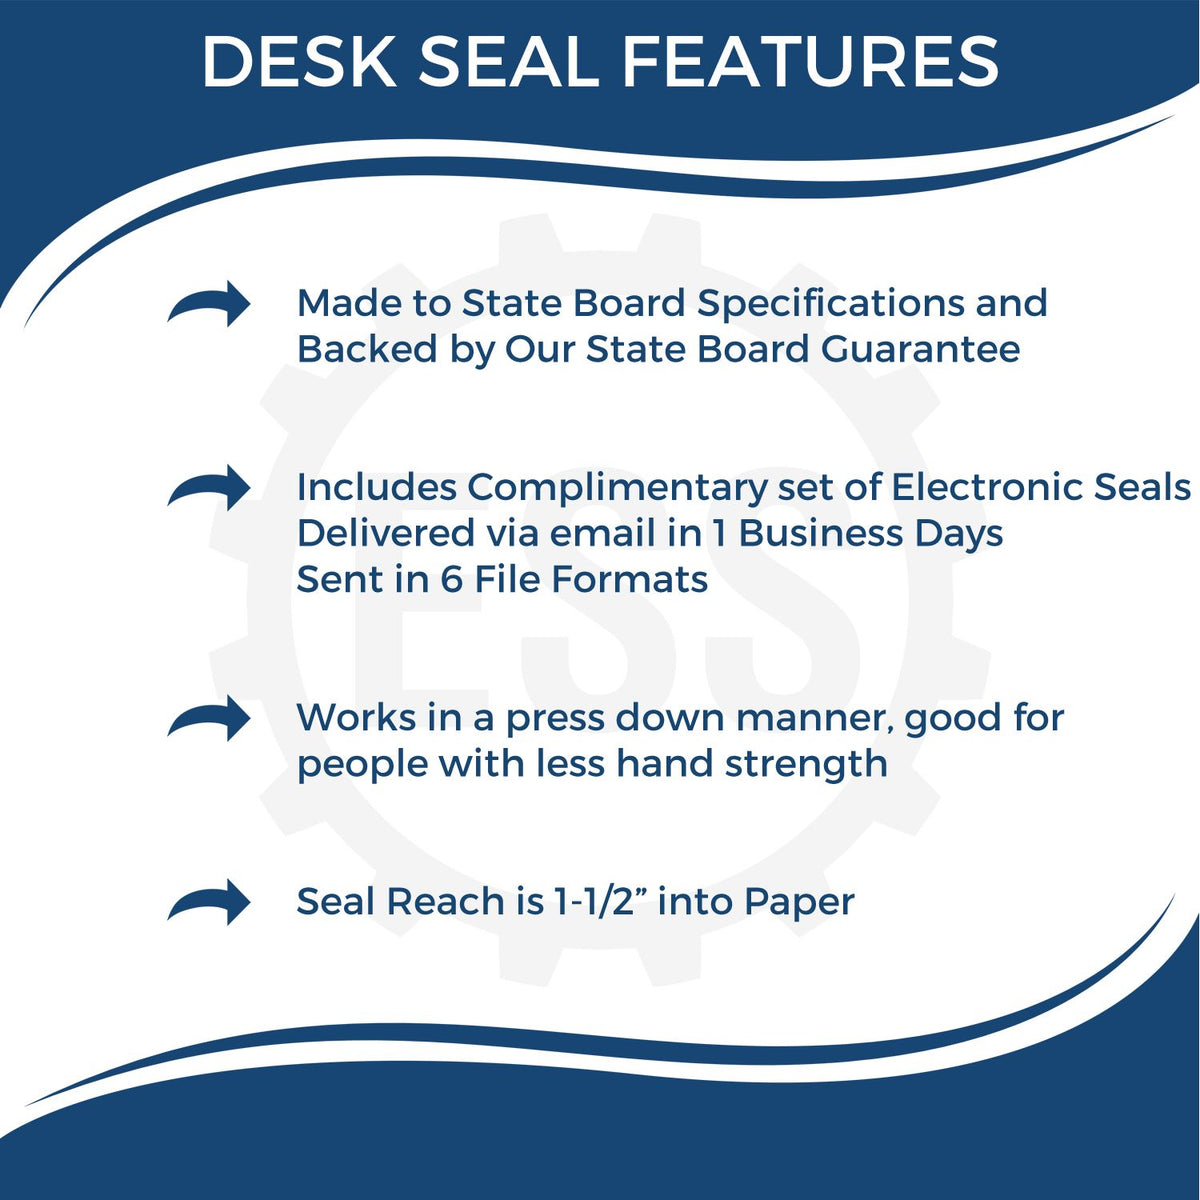 A picture of an infographic highlighting the selling points for the Texas Desk Architect Embossing Seal